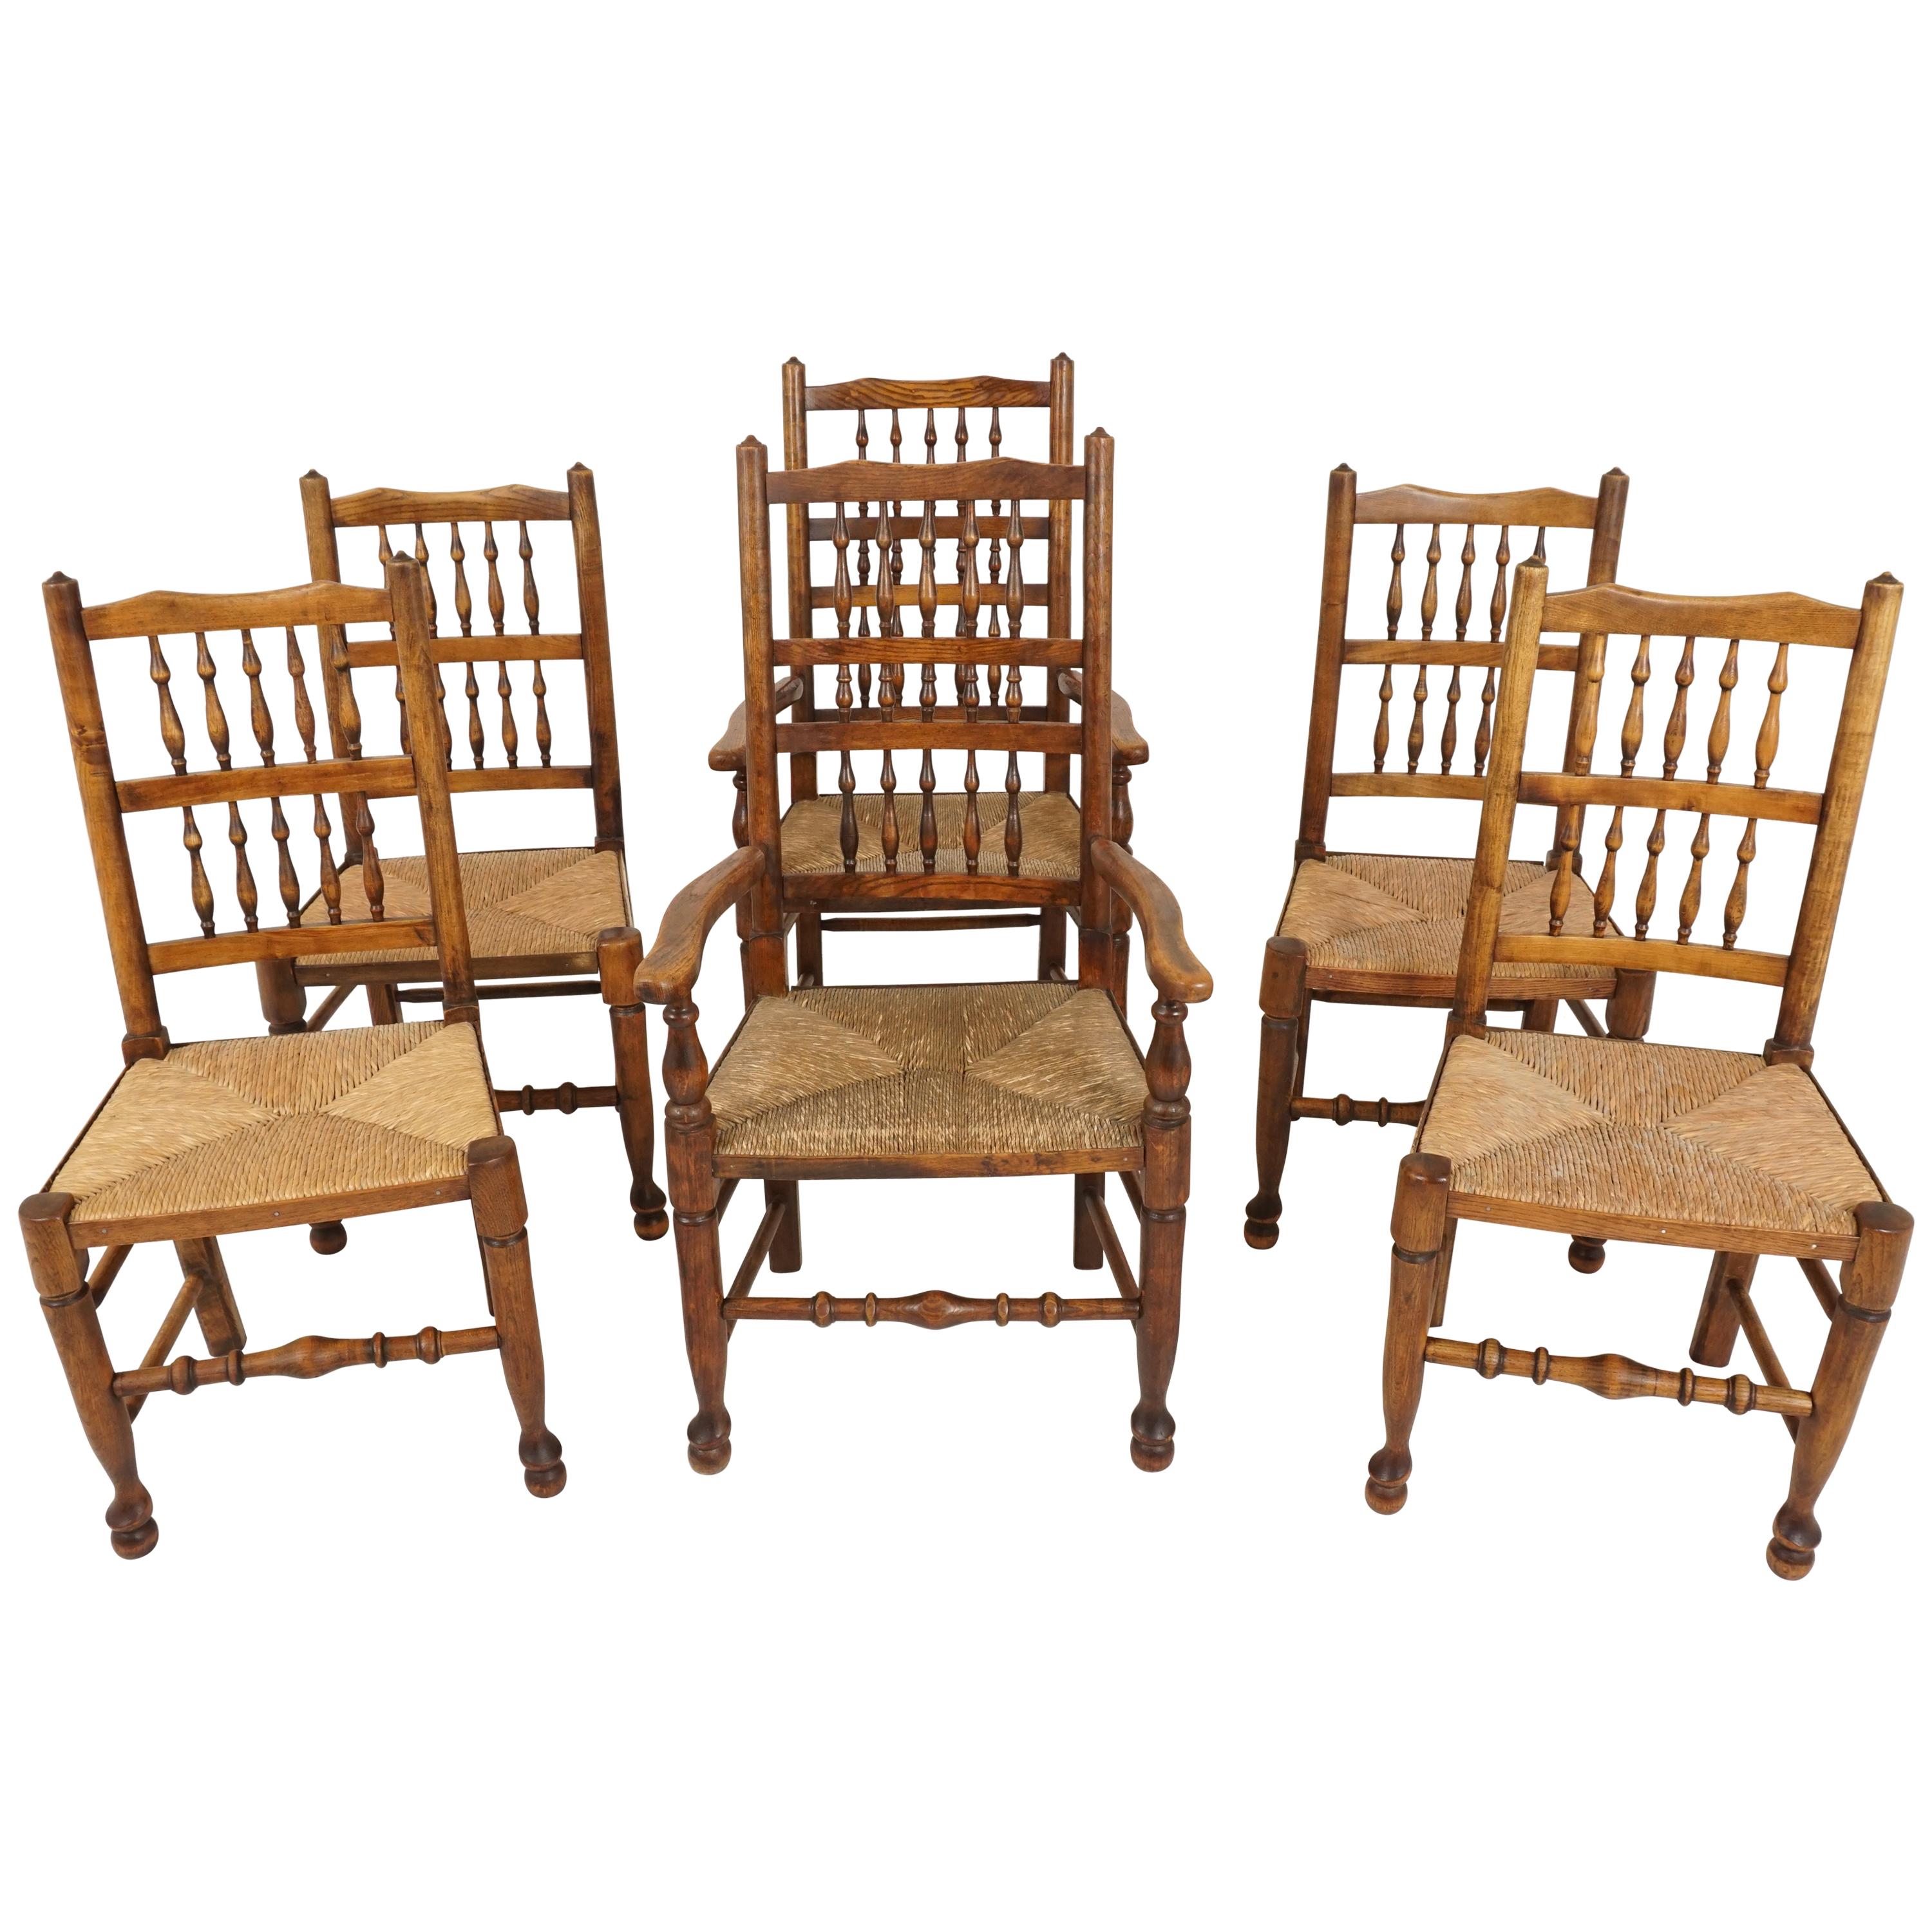 6 Antique Rush Seated Chairs, Country Lancashire Farmhouse, Spindle Back Chairs